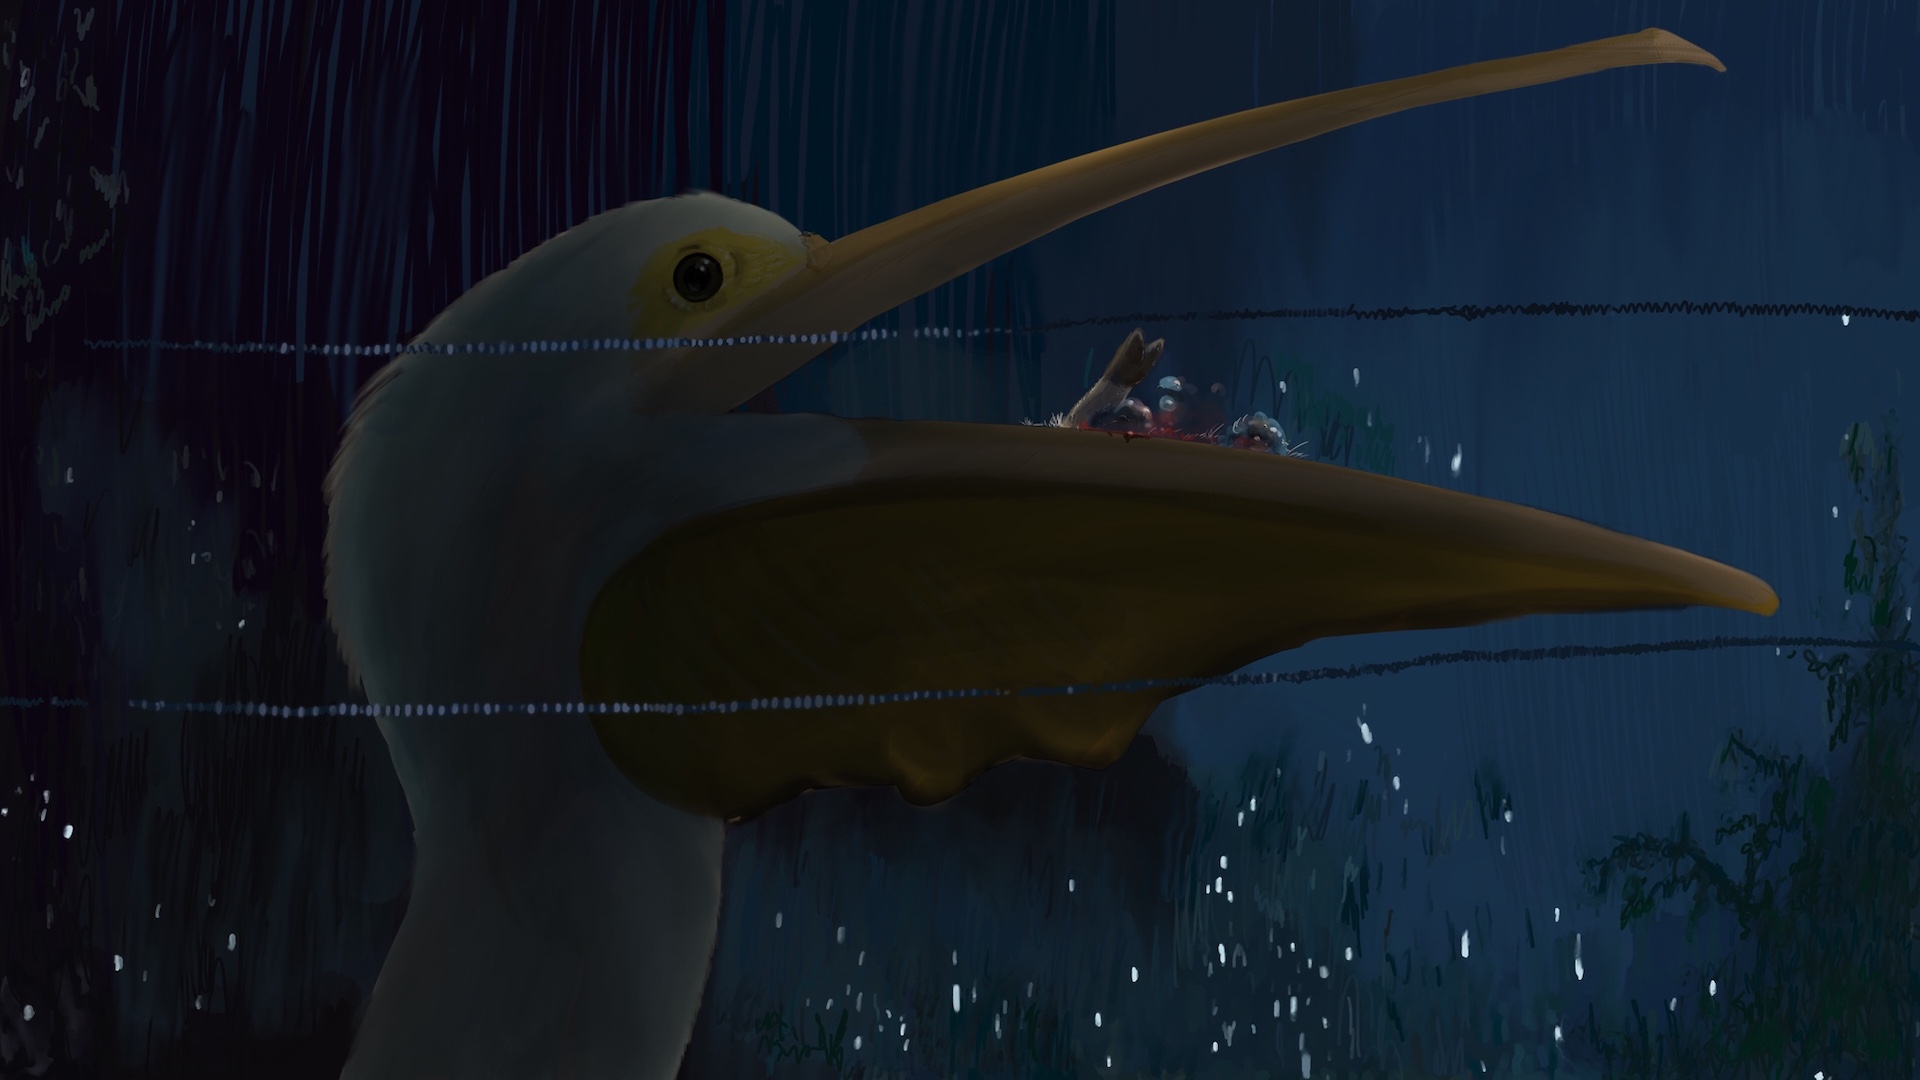 Digitally painted reproduction of of a frame from Jurassic Park, but instead of the T-Rex eating the goat, it's a giant pelican.'